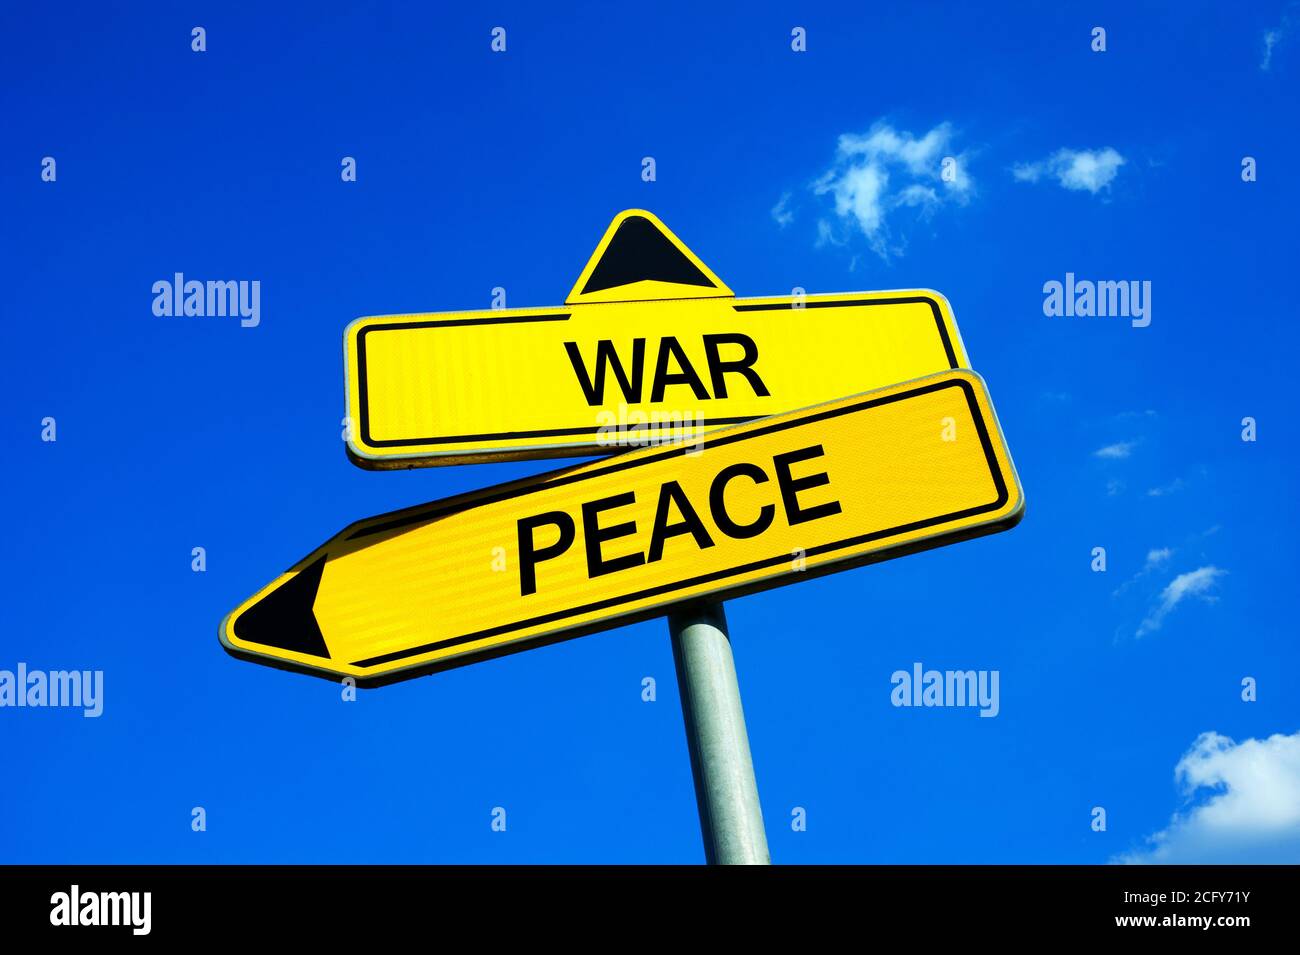 War or Peace - Traffic sign with two options - pacifists vs supporter of military actions and offensive policy Stock Photo